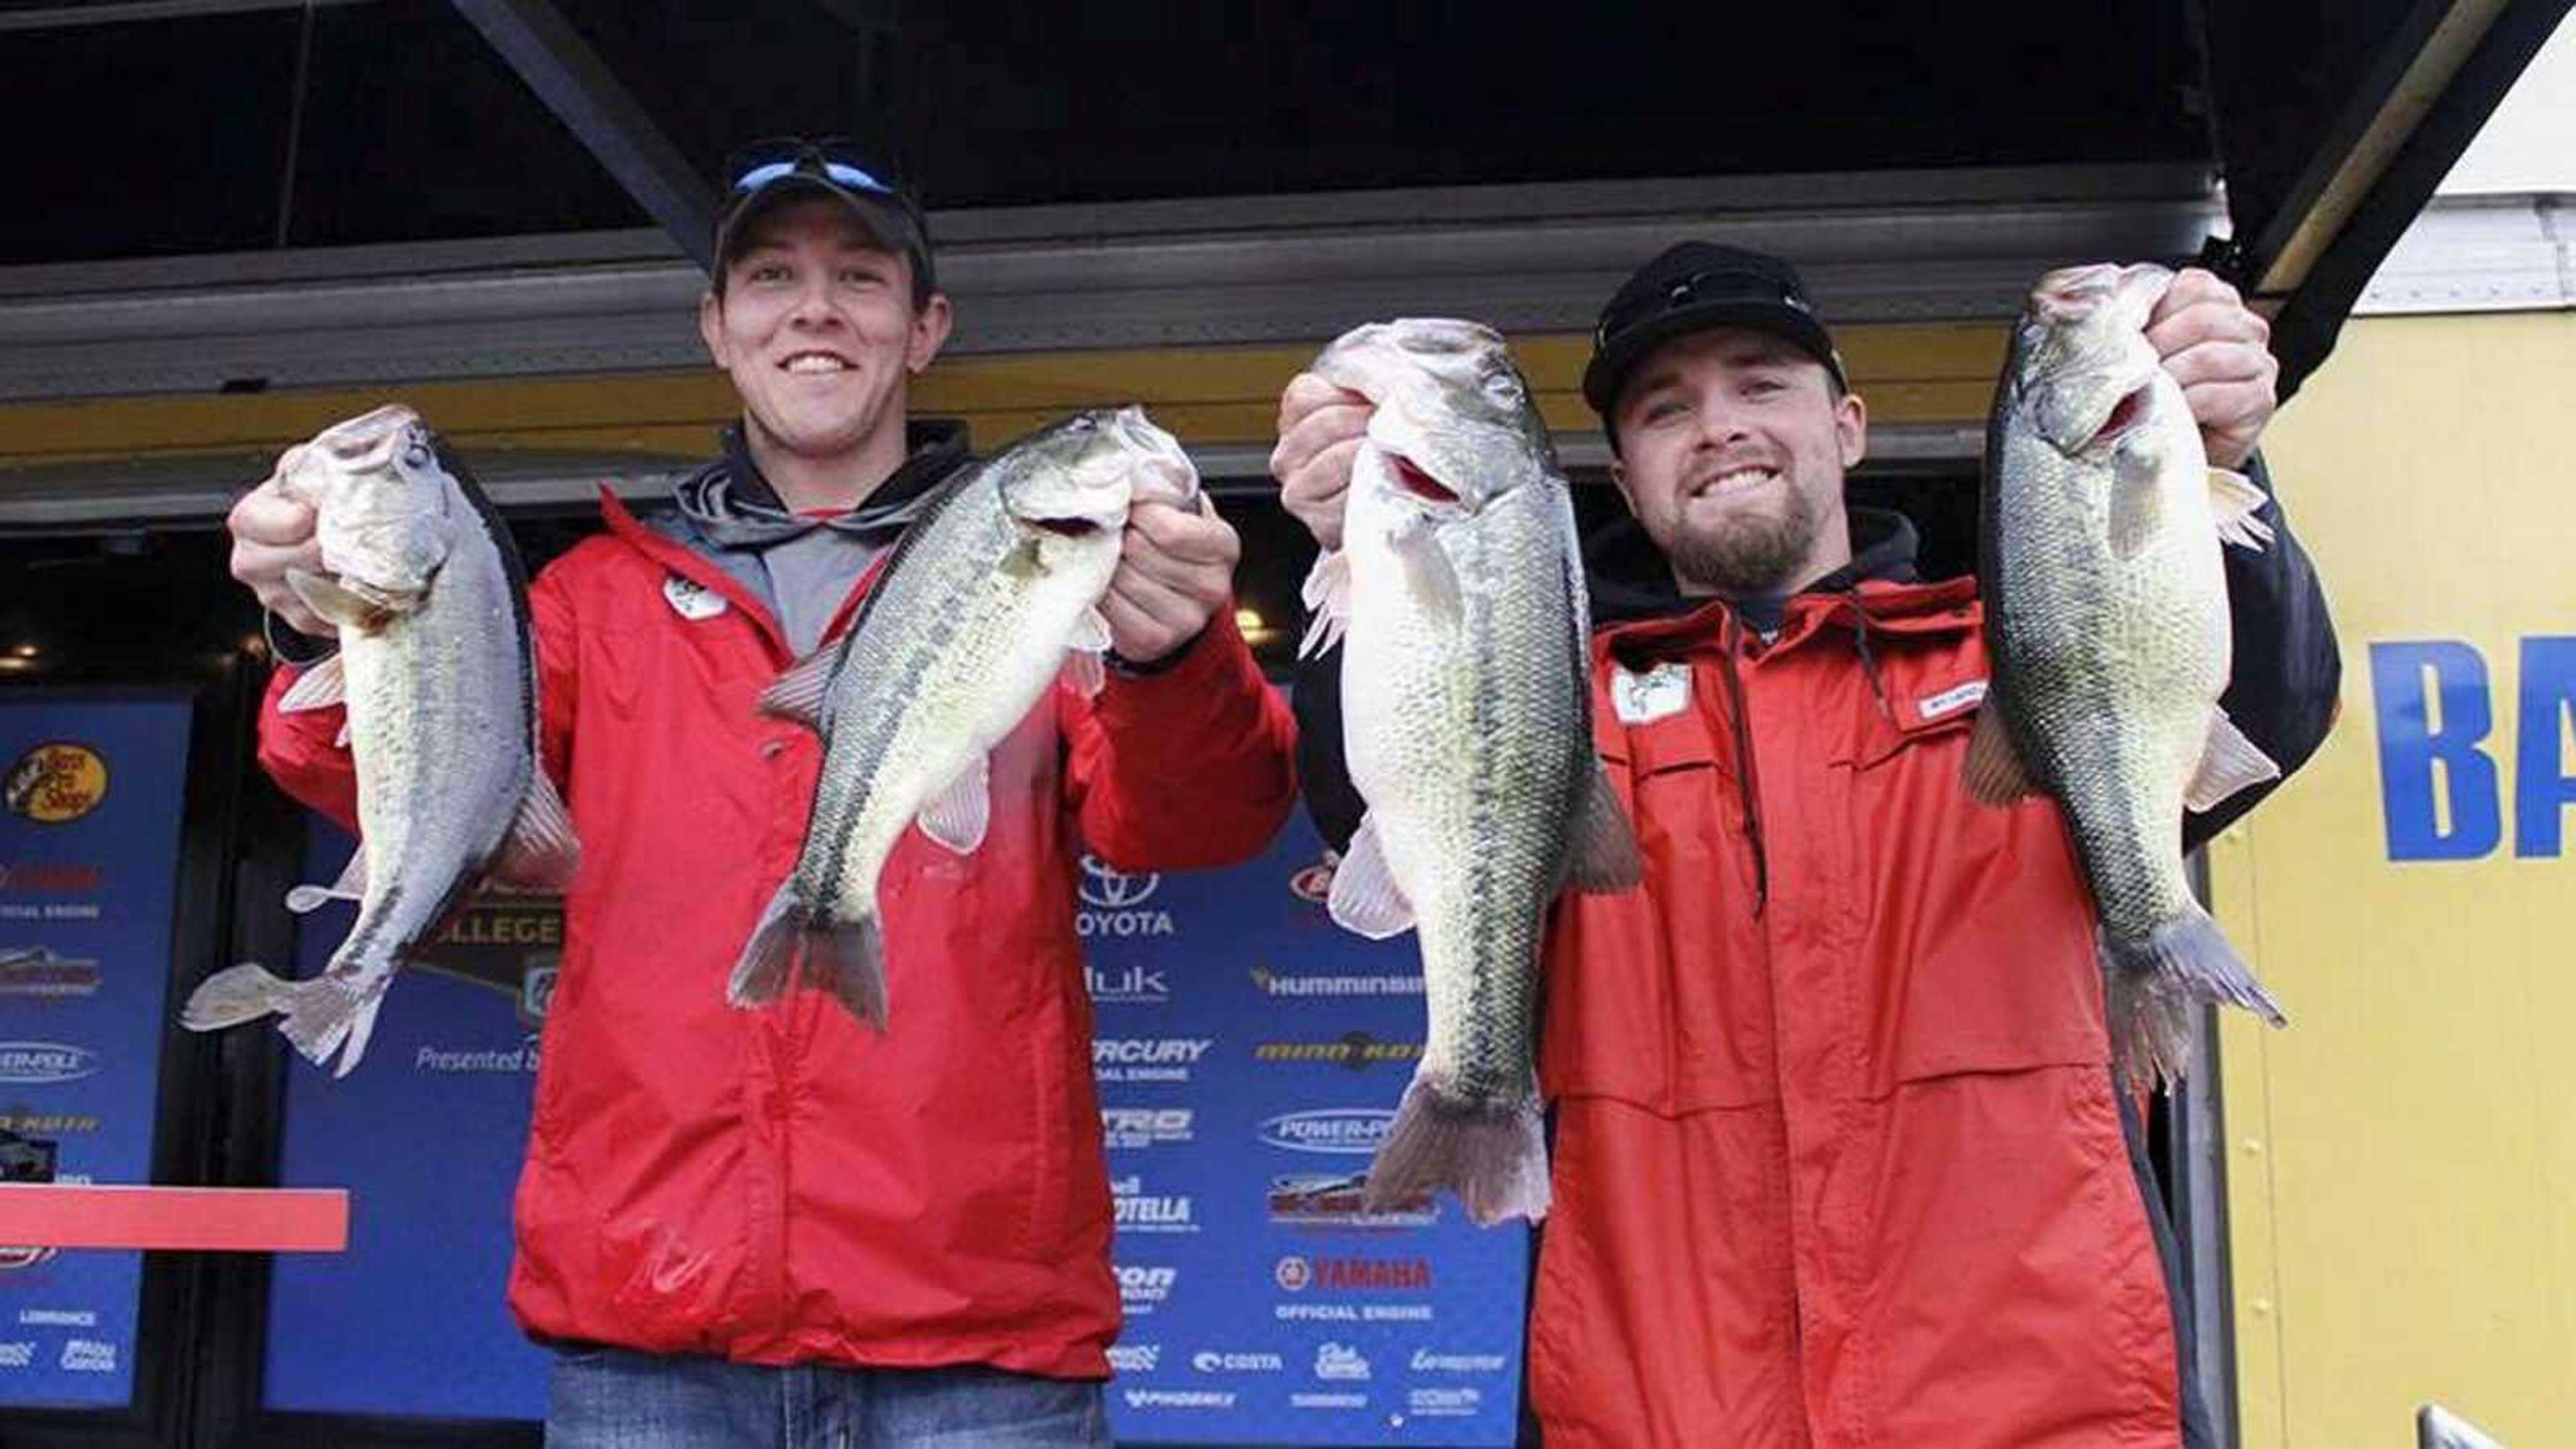 Left to Right: John Soloman and Nick Moore hold up fish while competing this season.